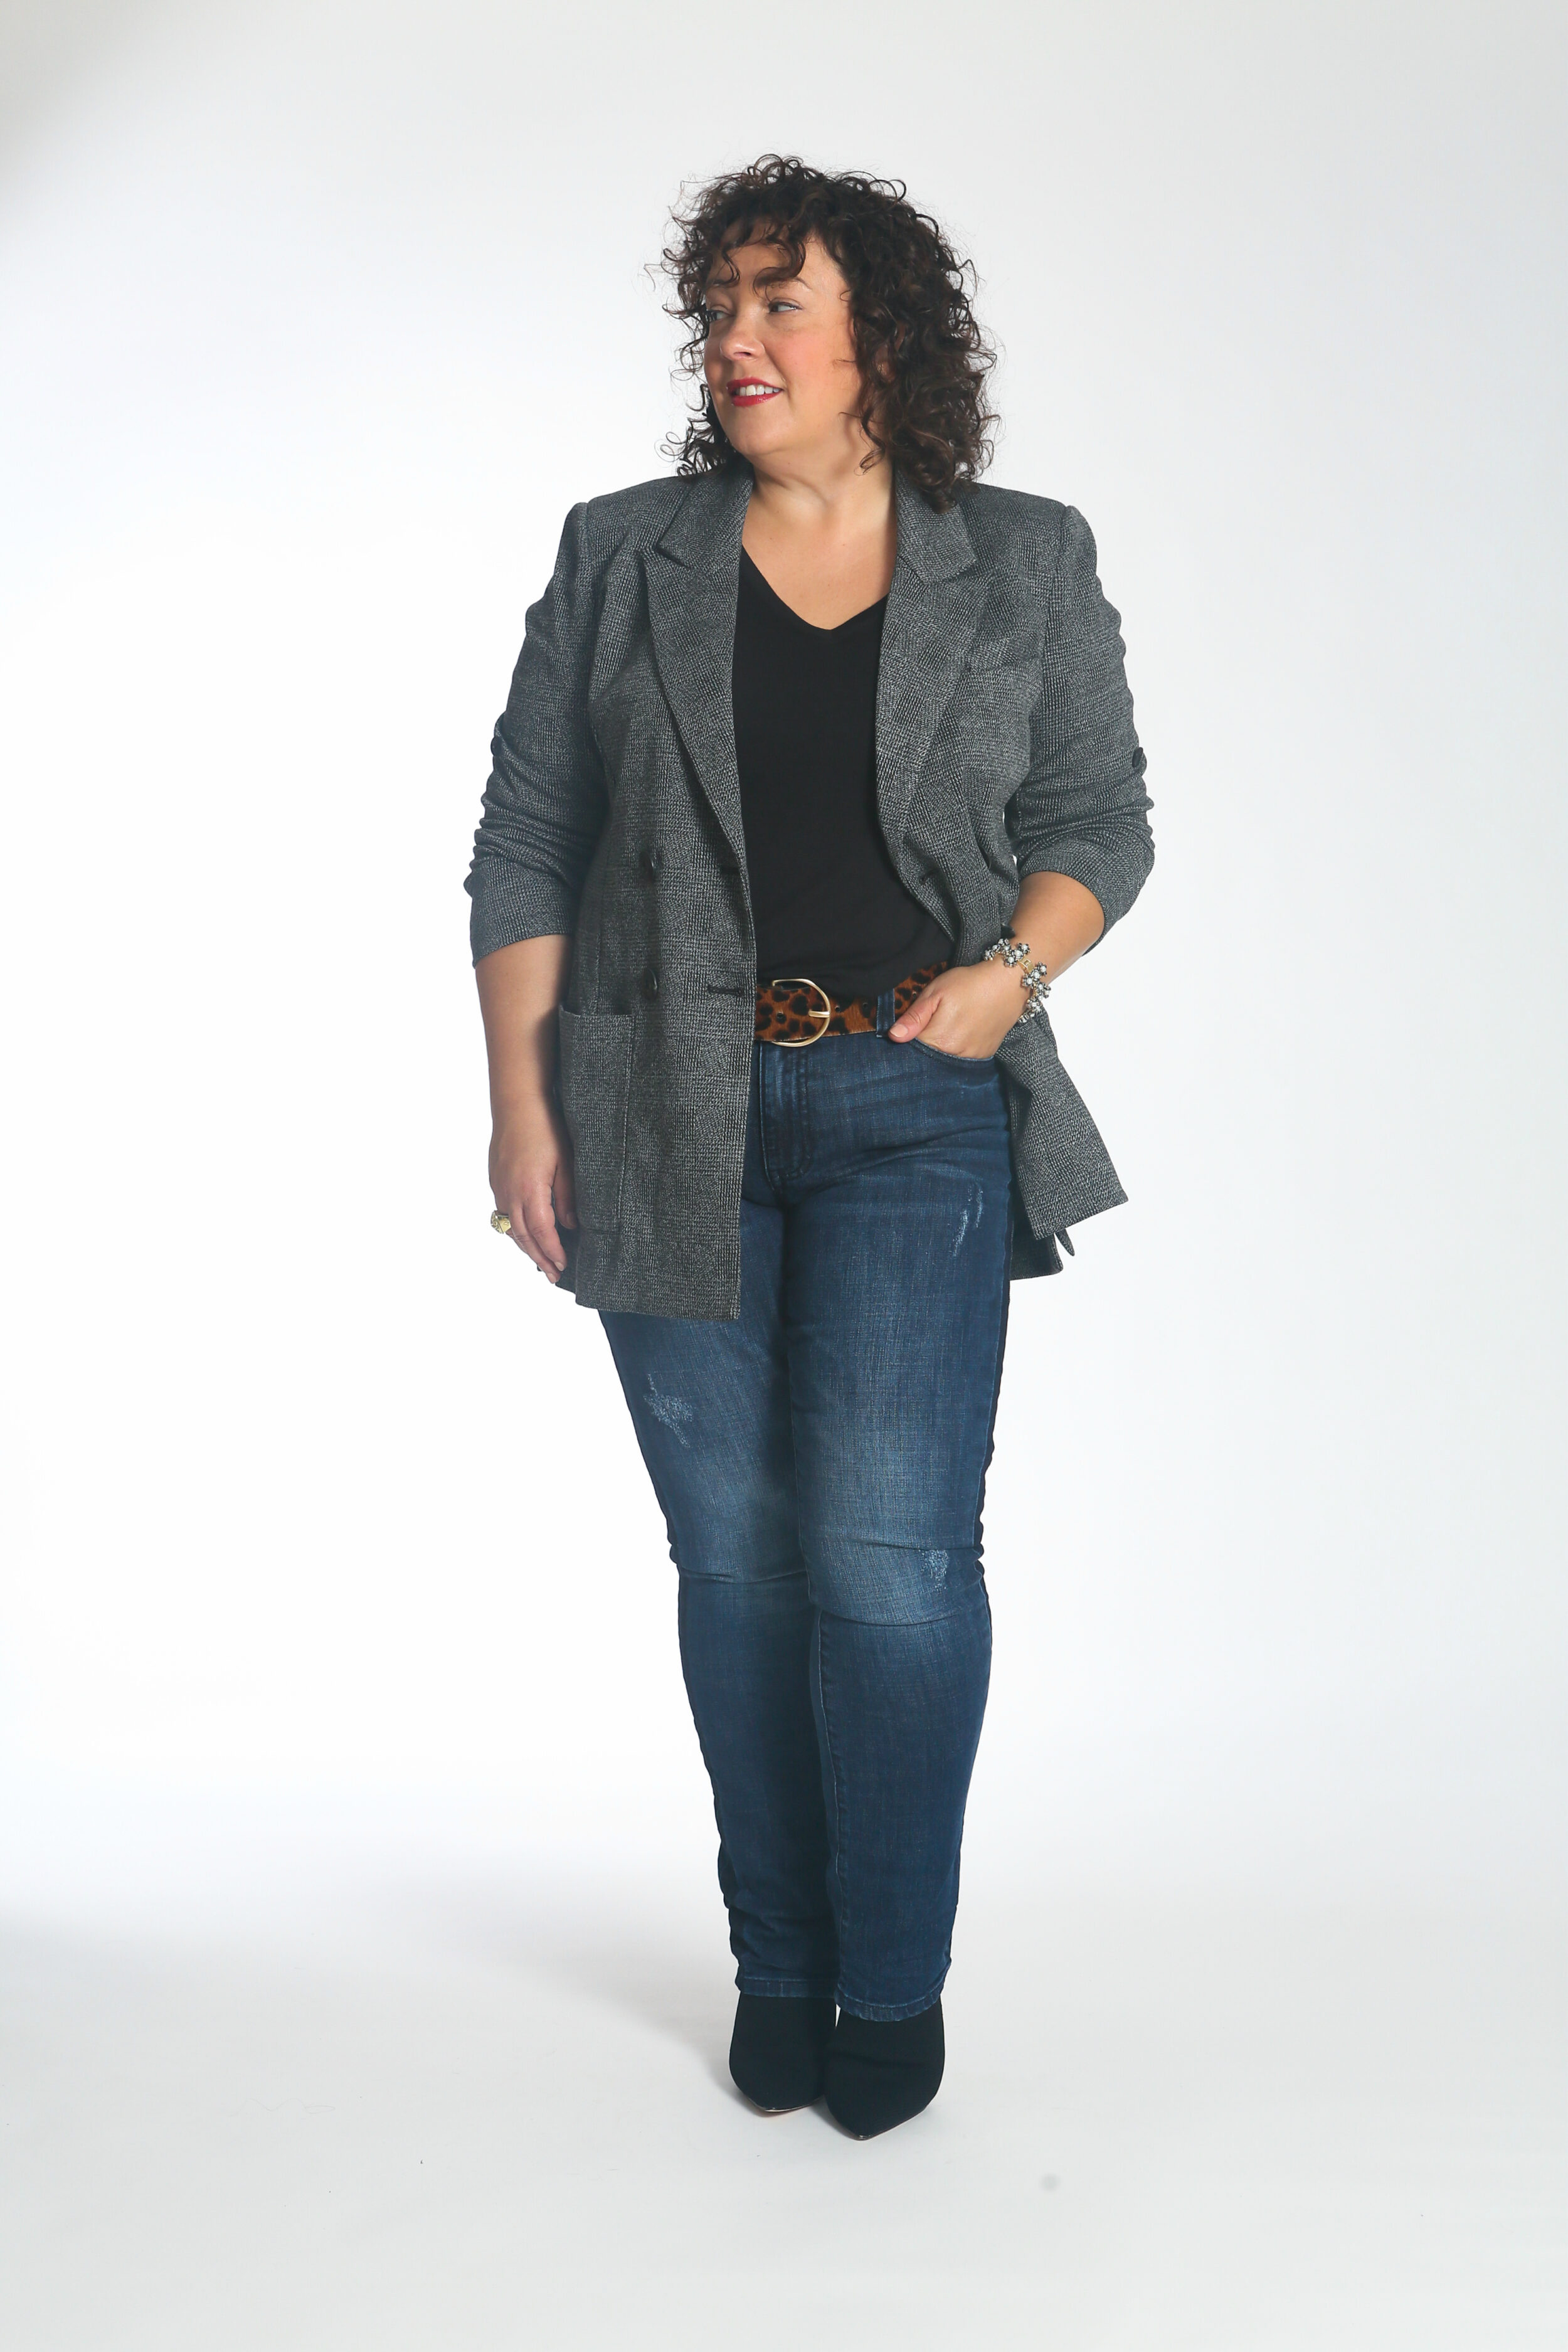 Wardrobe Oxygen in the cabi Bond Blazer unbuttoned over the Reveal tee and Tuxedo High Straight jeans